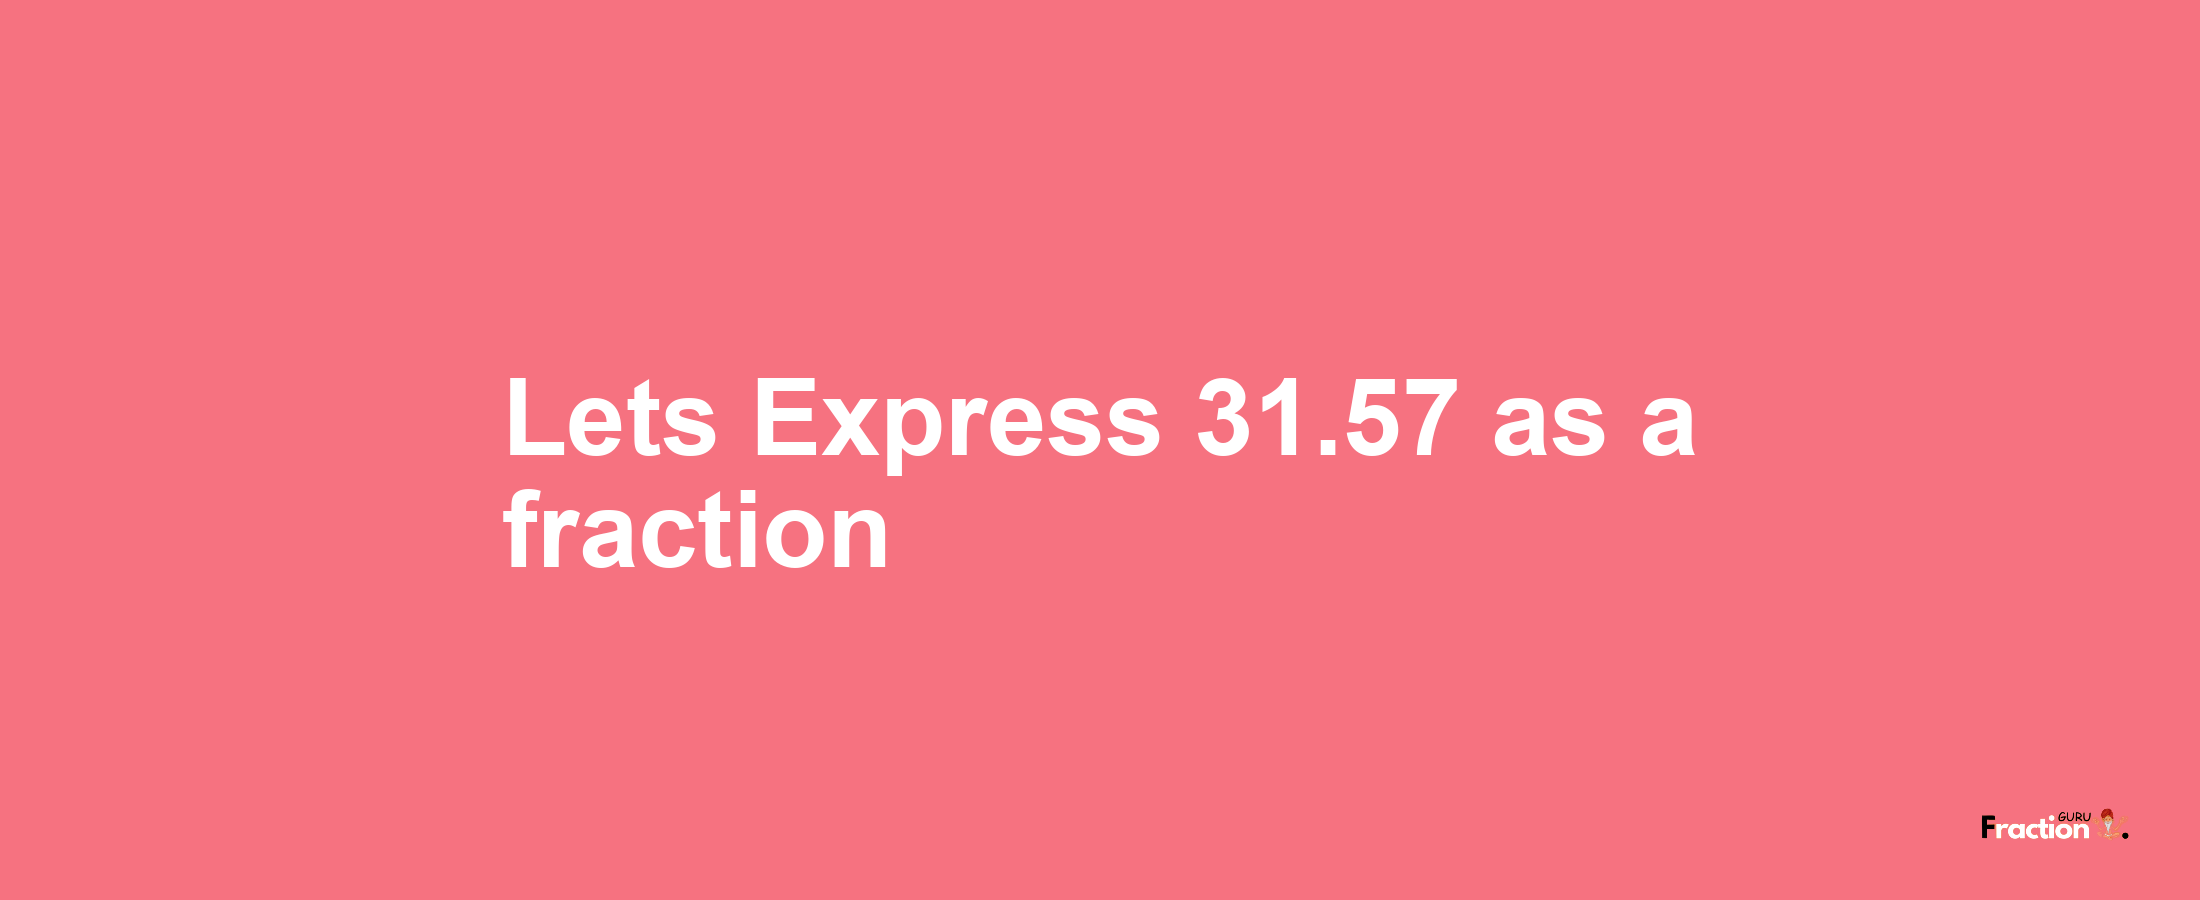 Lets Express 31.57 as afraction